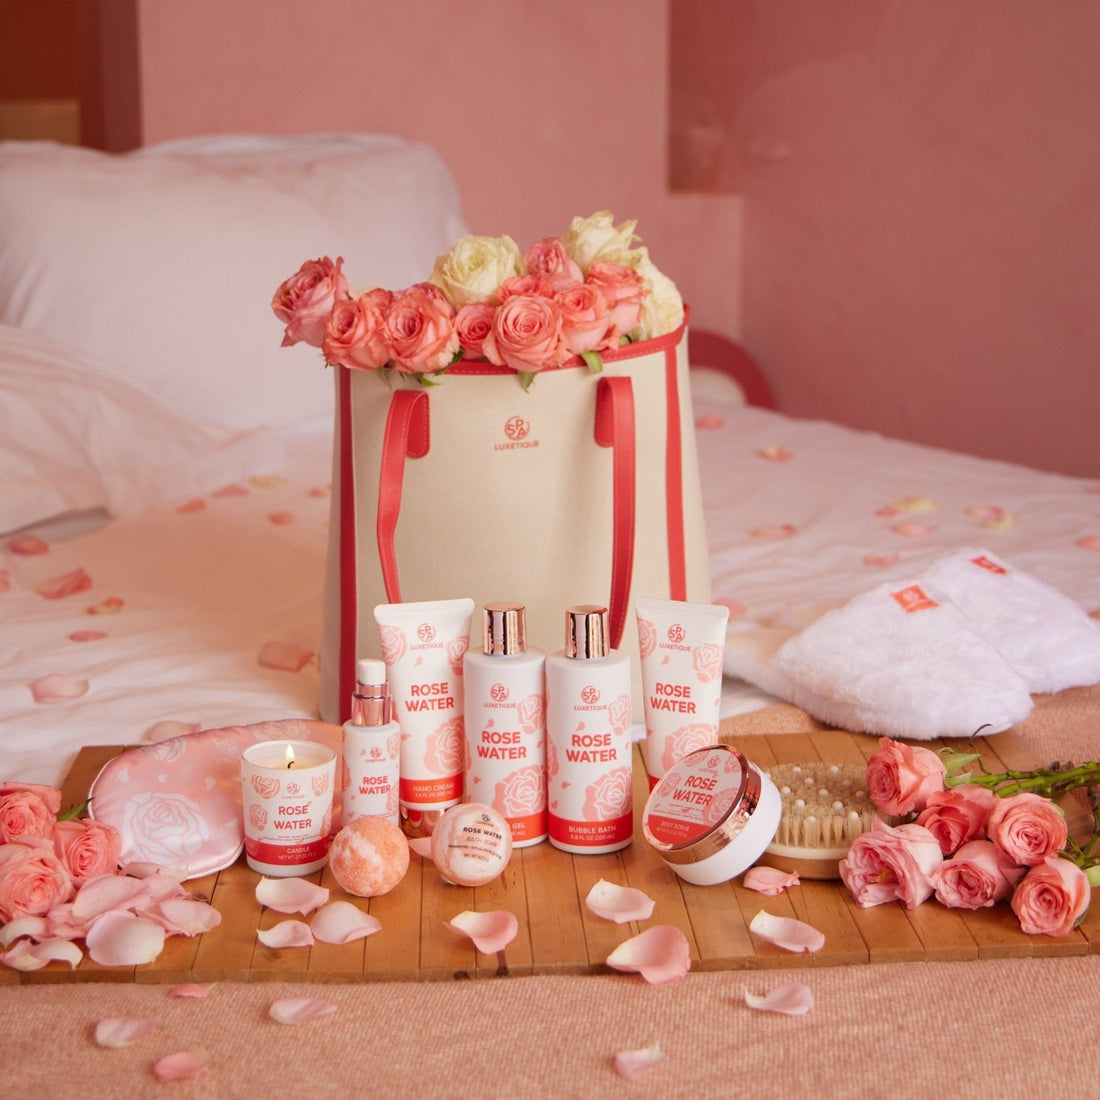 Spa Luxetique Gift Sets Rose Water Gift Set